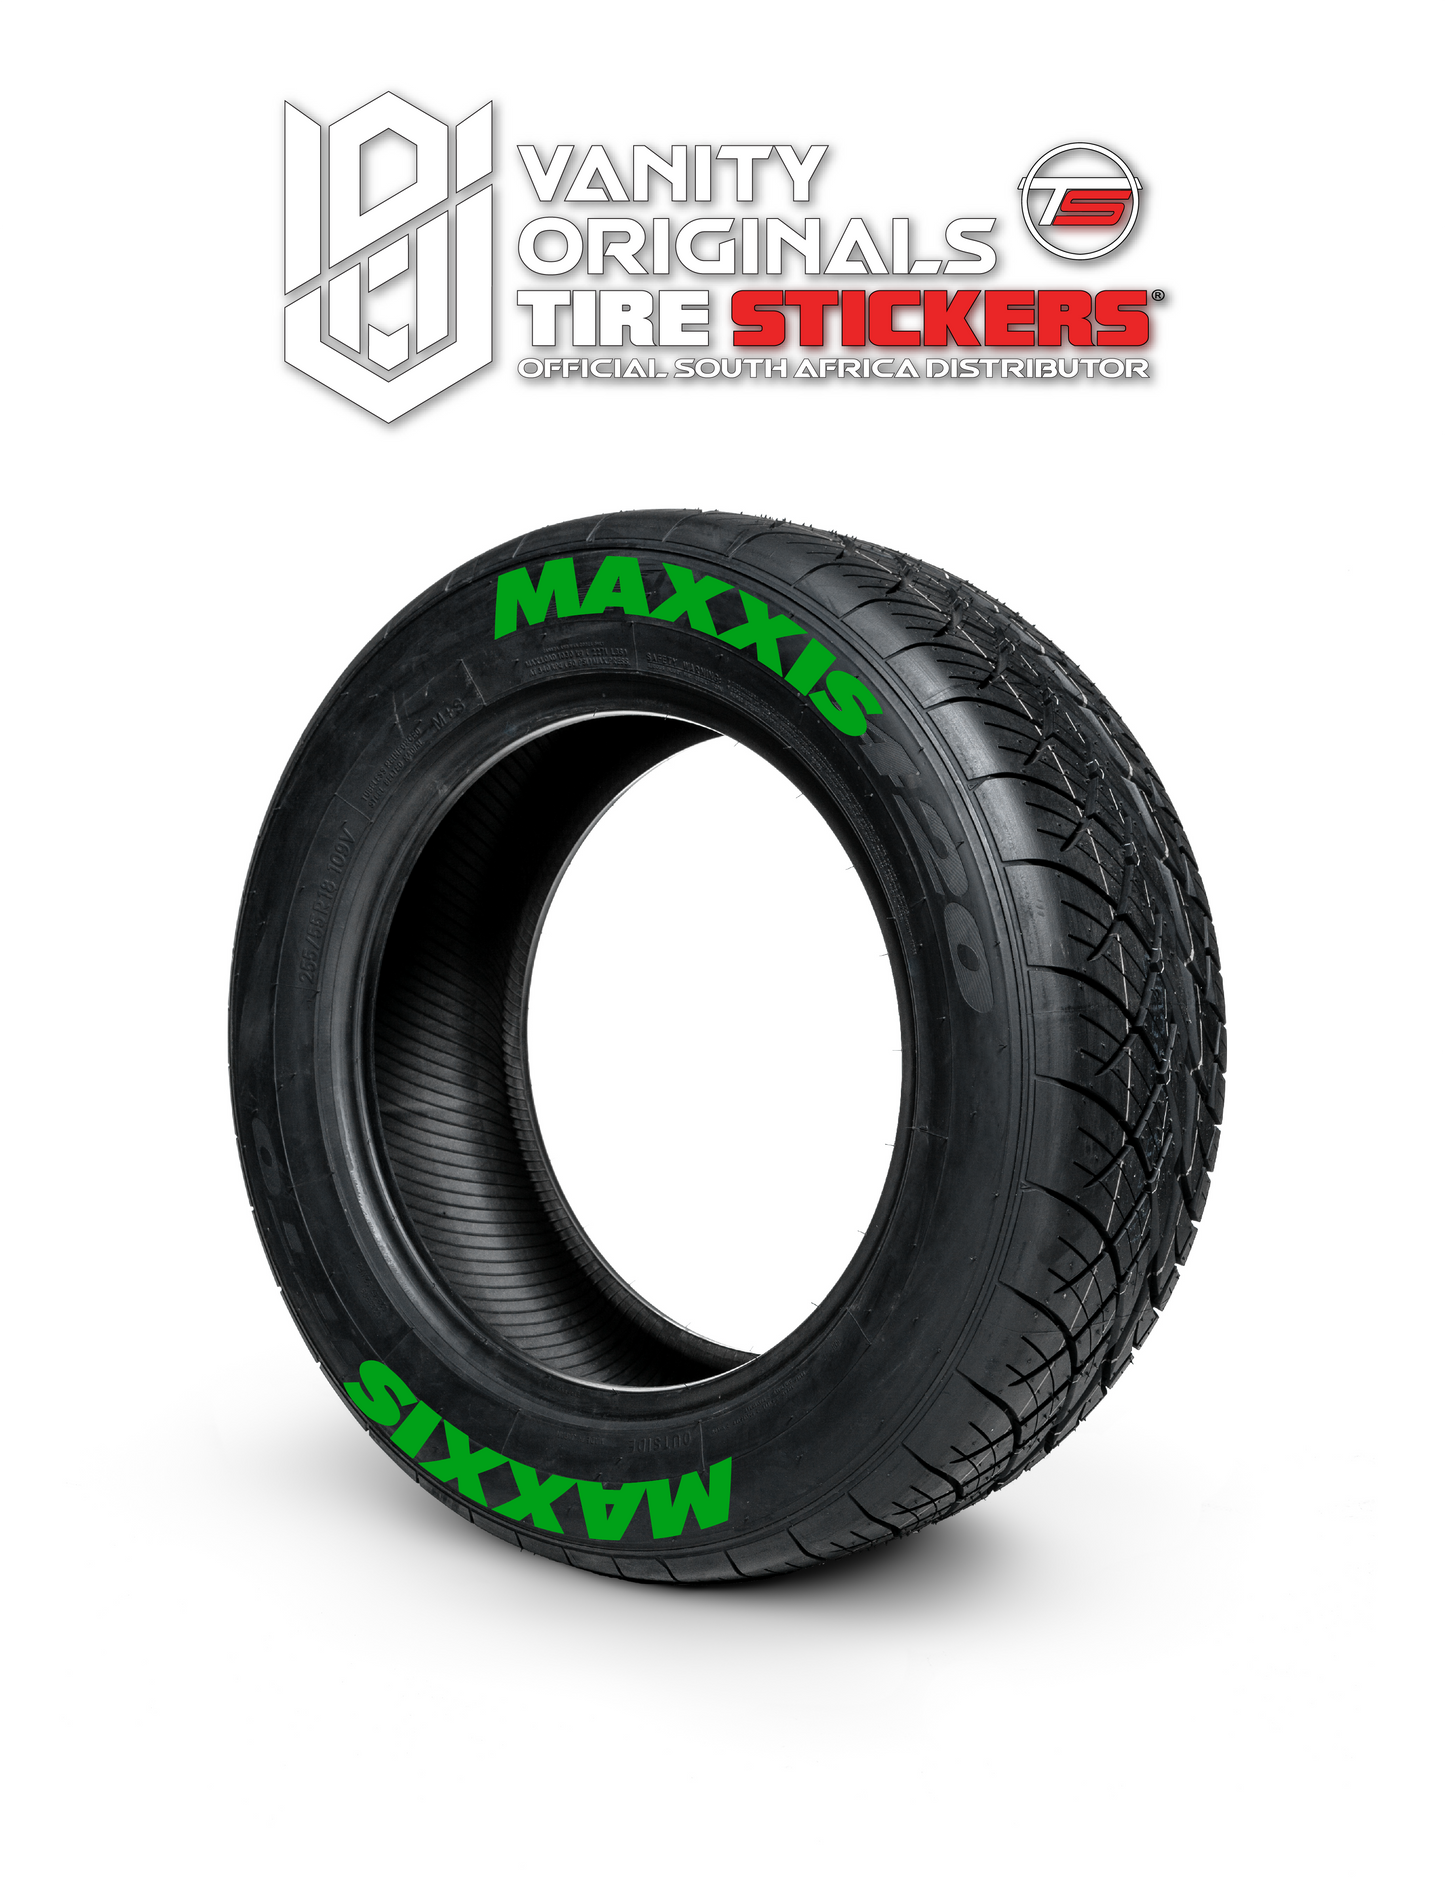 Maxxis ( 8x Rubber Decals, Adhesive & Instructions Included )